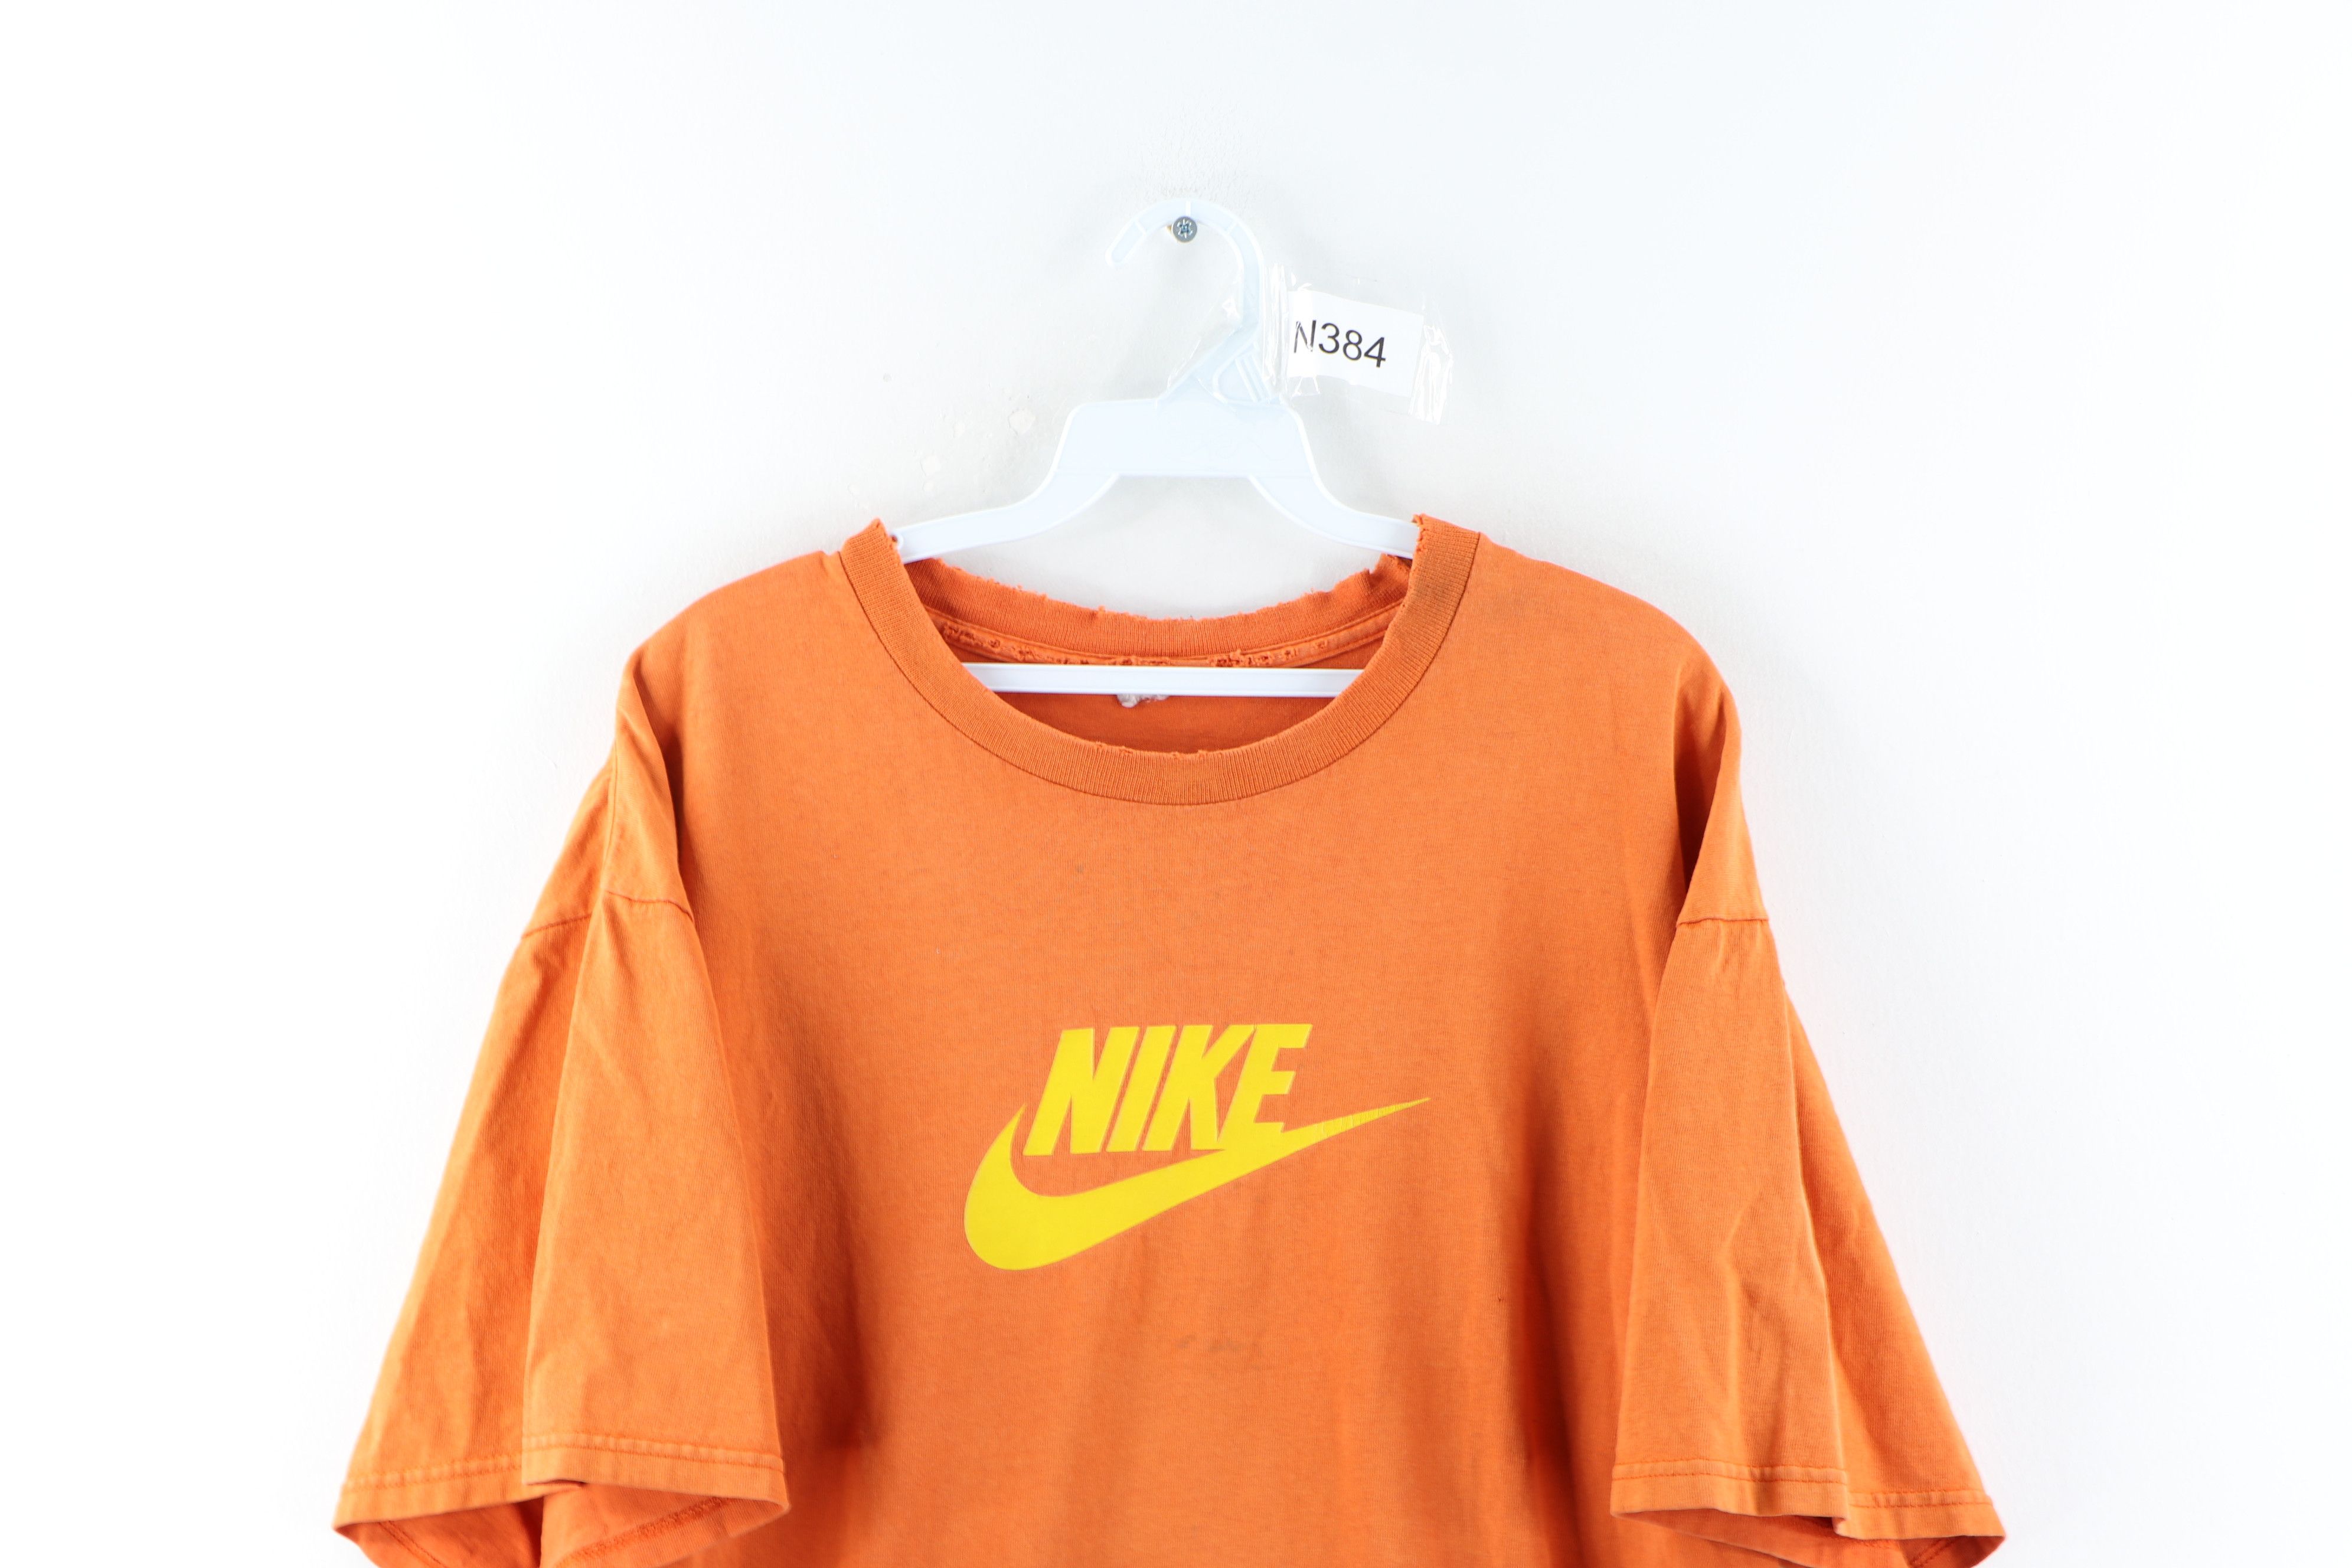 Nike Vintage Nike Travis Scott Spell Out Swoosh Thrashed T-Shirt Size US XL / EU 56 / 4 - 2 Preview